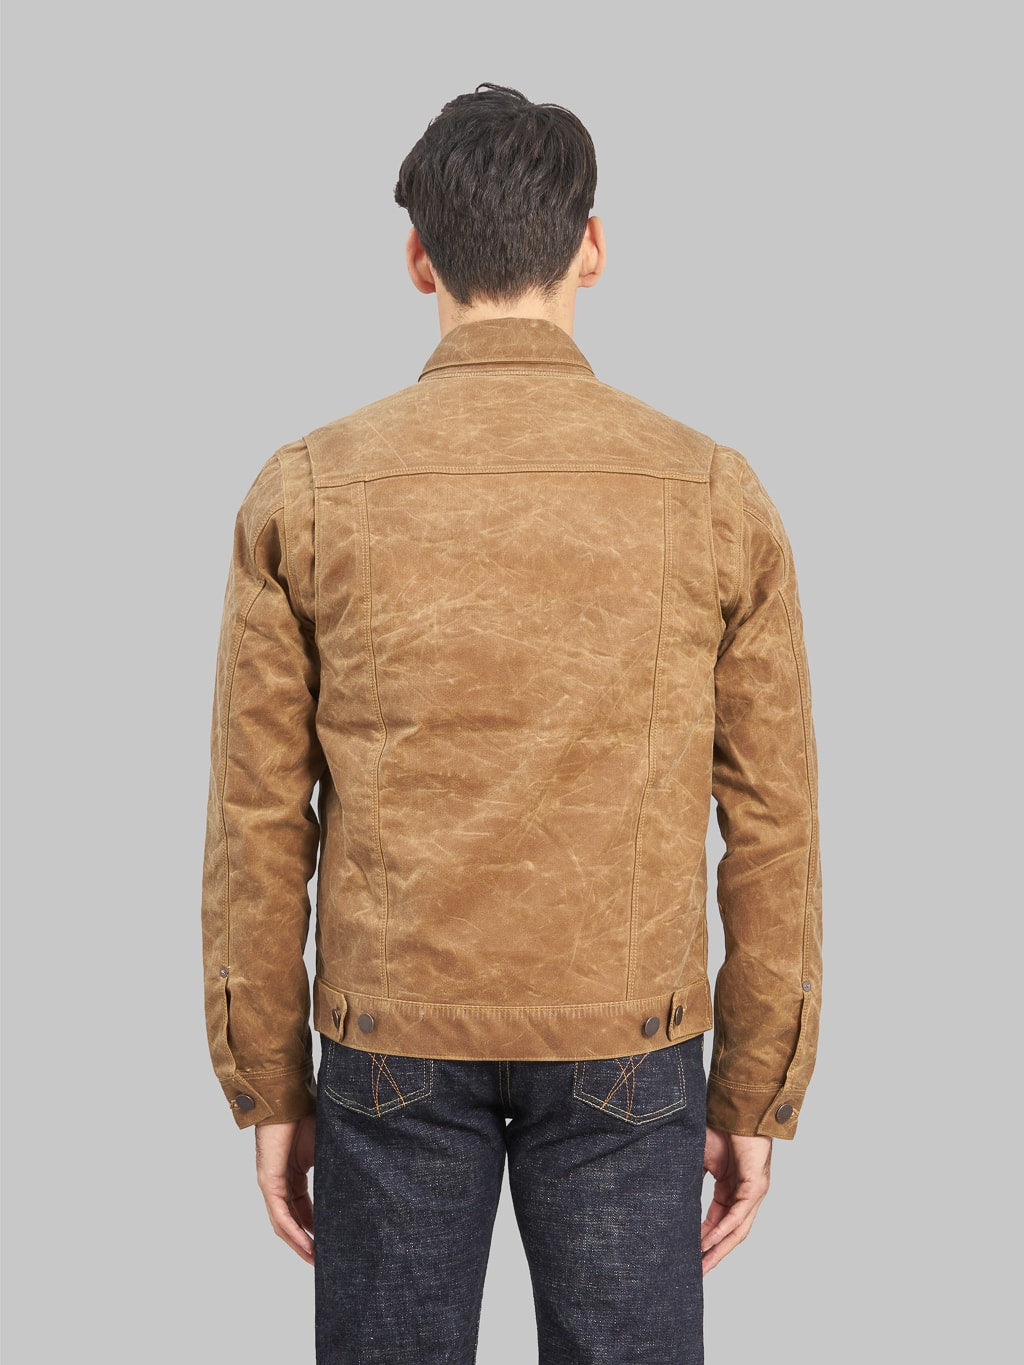 Freenote Cloth Riders Jacket Waxed Canvas Rust model back fit